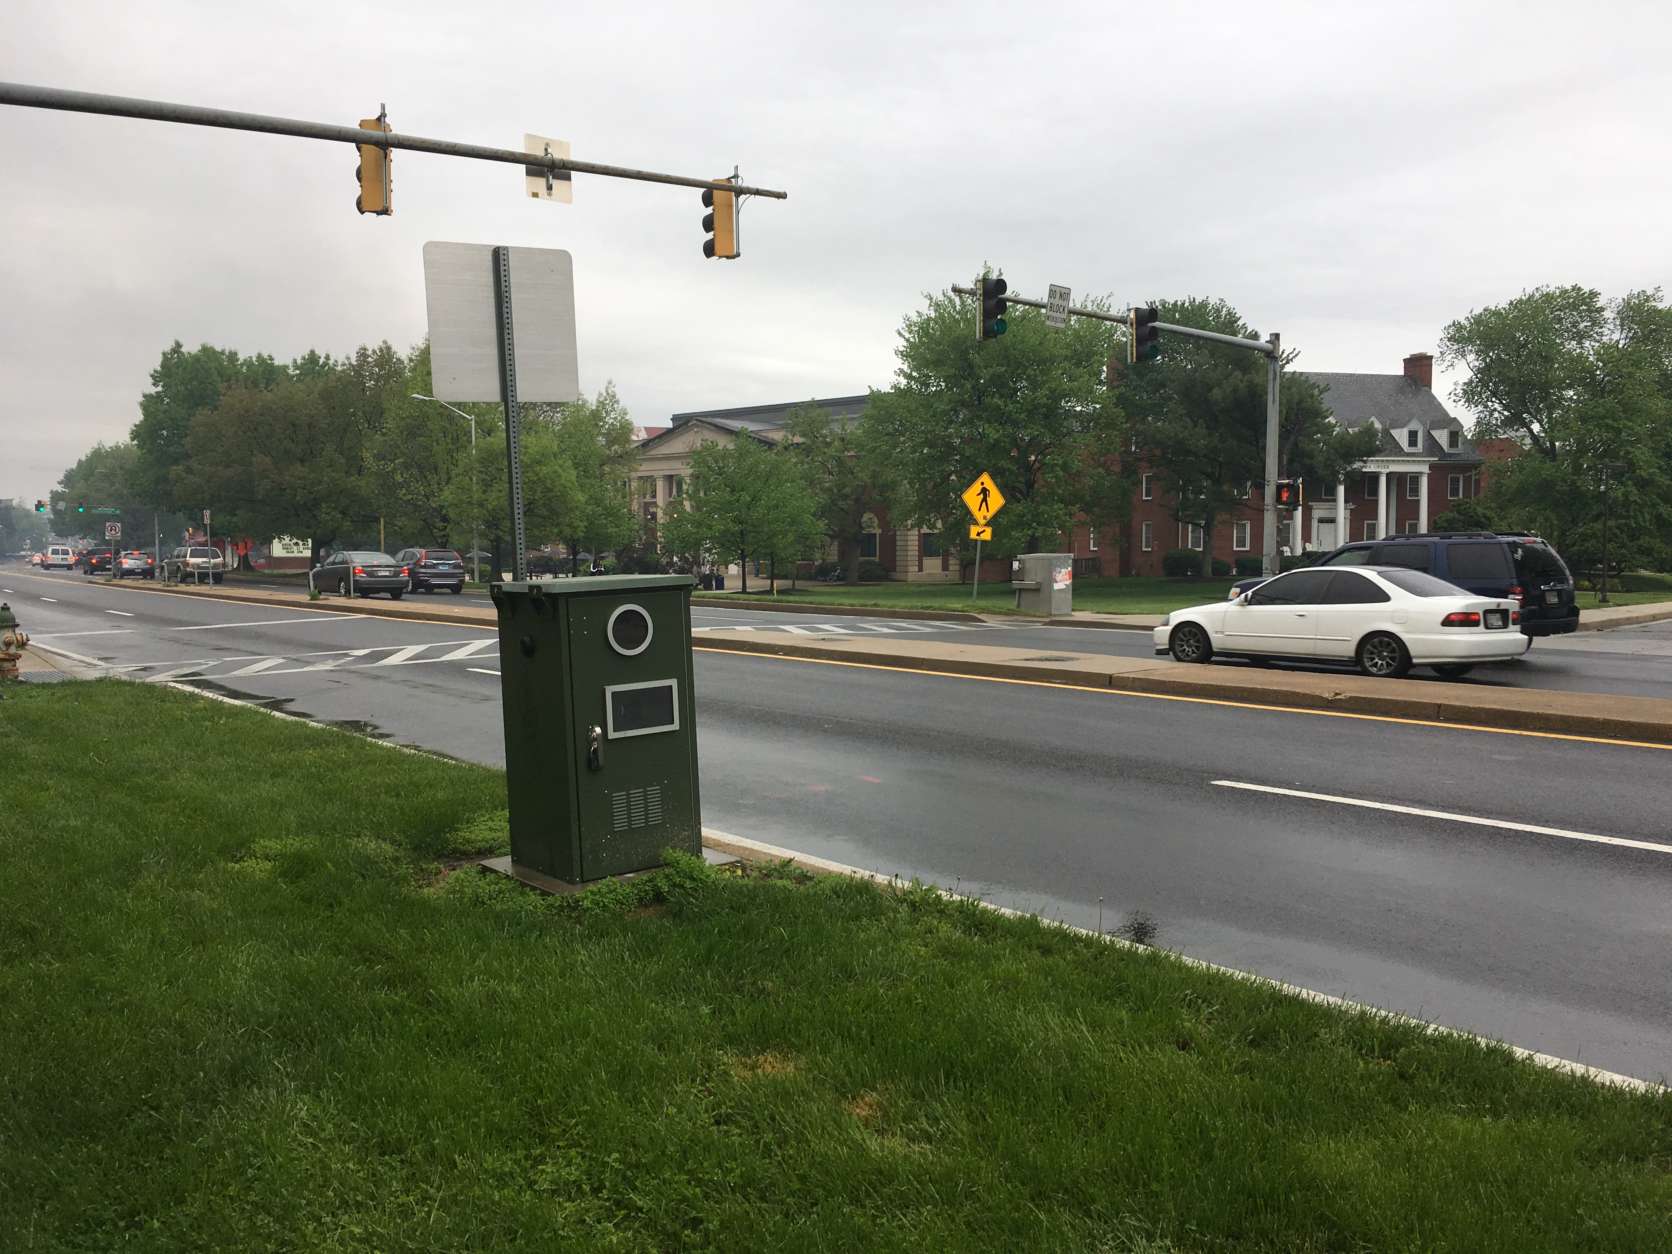 After several deaths involving pedestrians near the University of Maryland, College Park, city leaders in 2014 extended the ticketing time of seven area cameras to 24 hours a day. (WTOP/Mike Murillo)